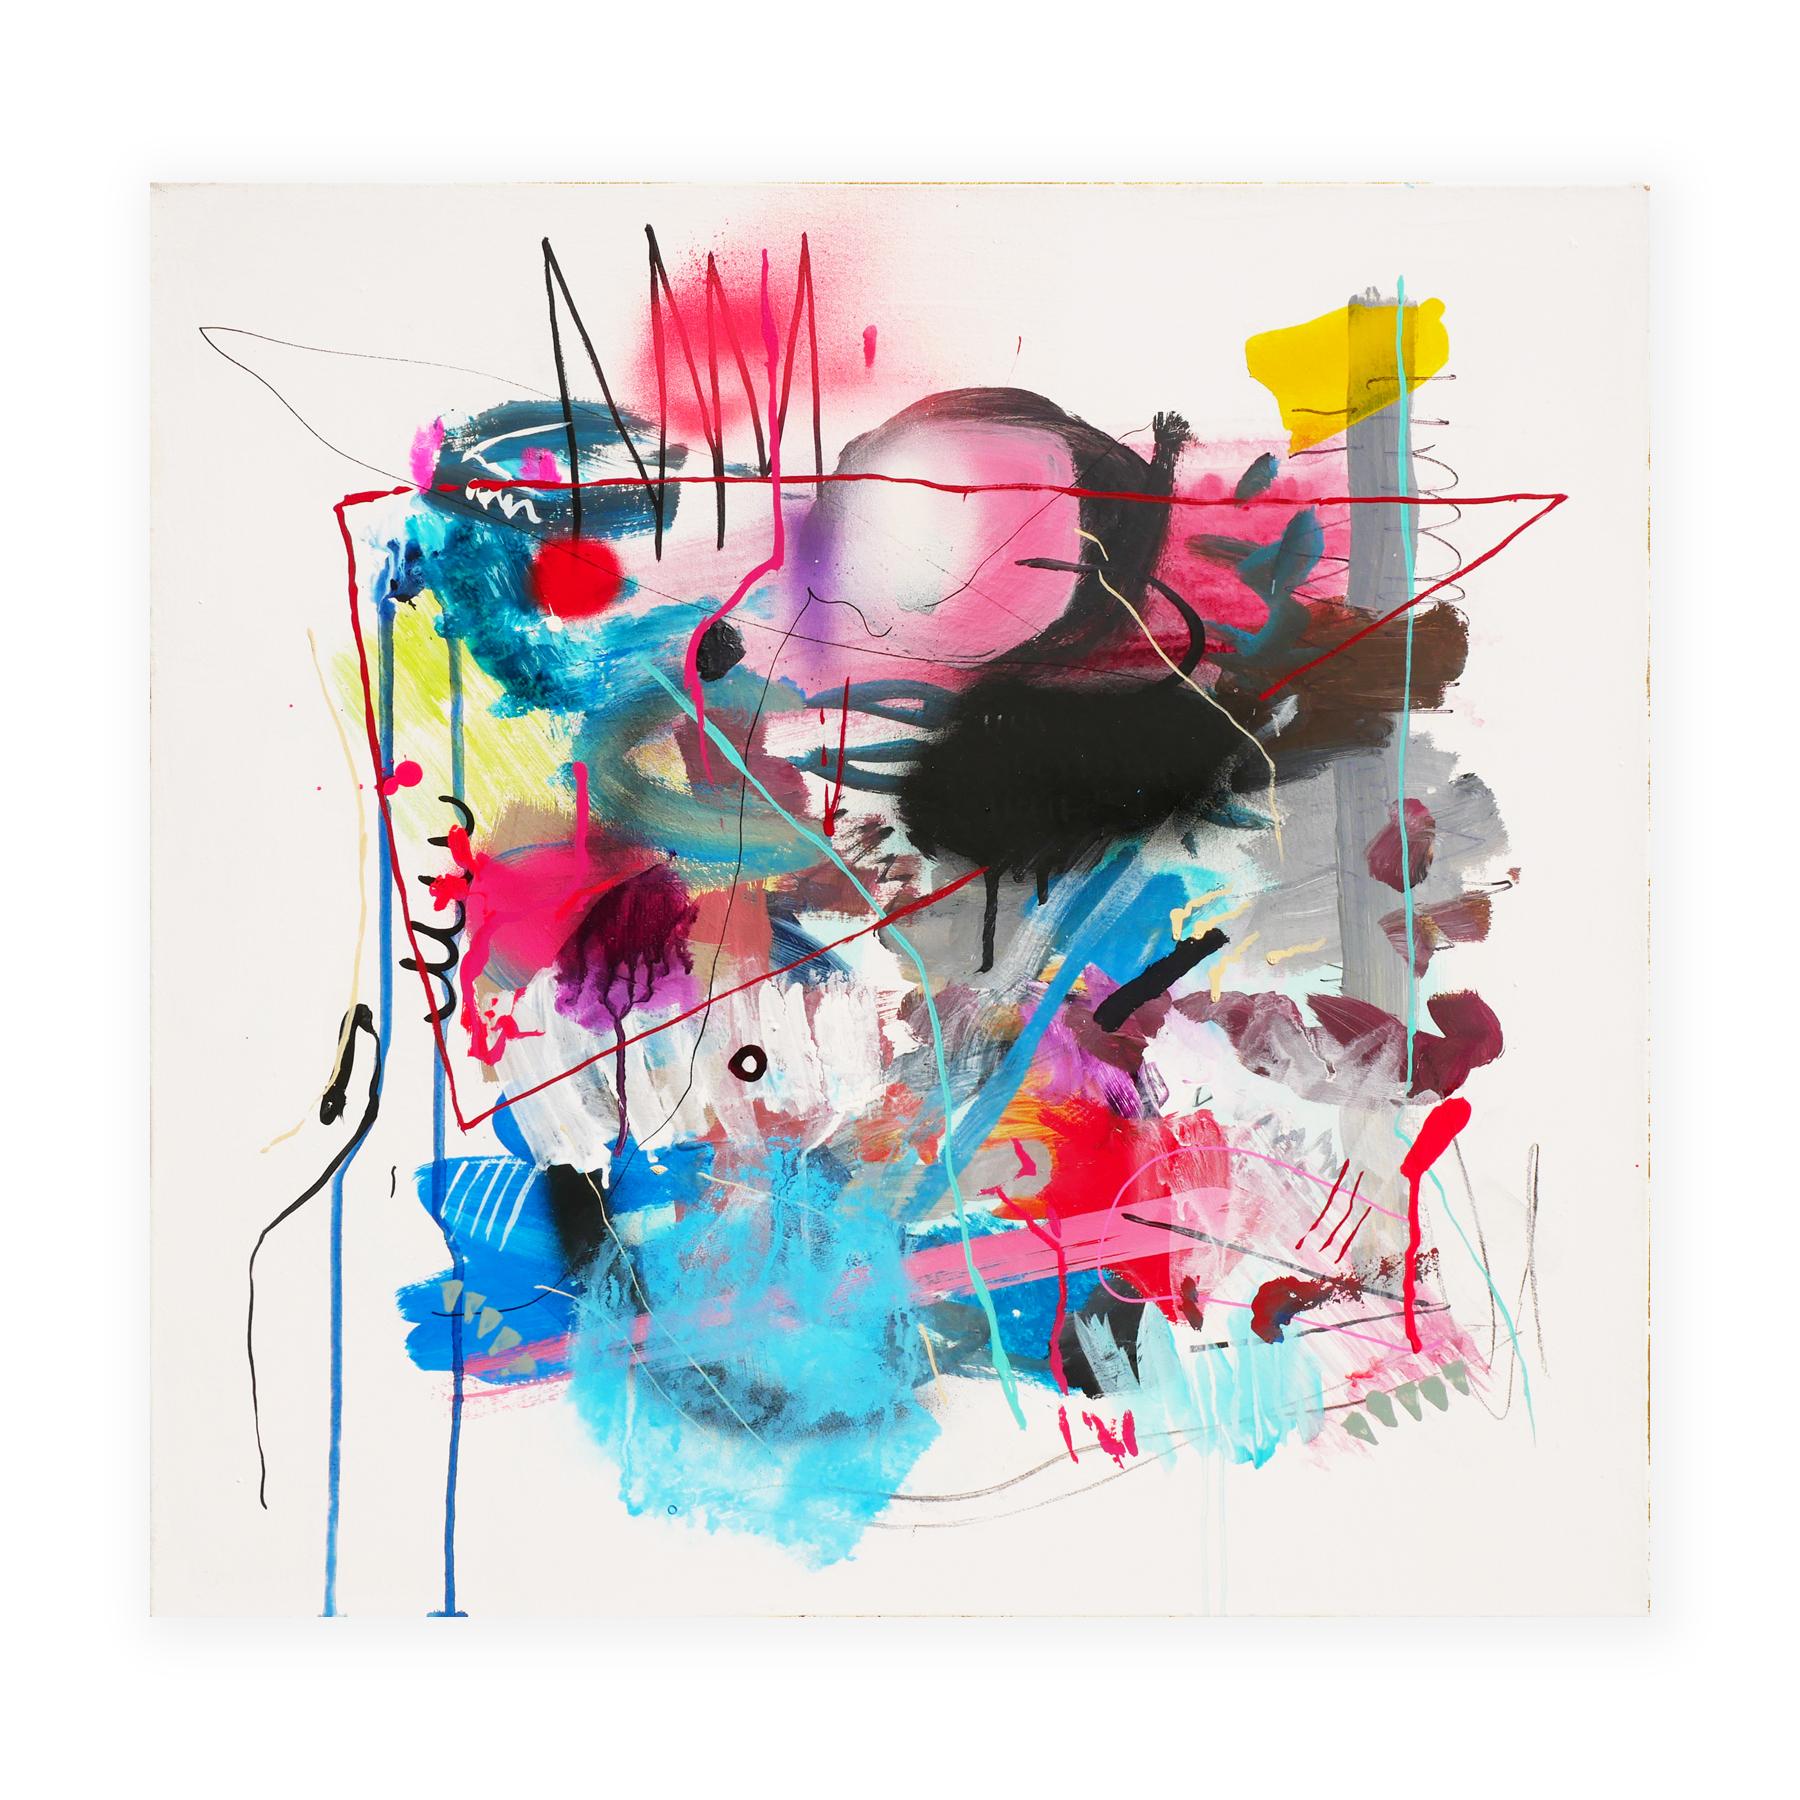 Colorful abstract contemporary mixed media painting by Houston, Texas artist David Hardaker. This painting features bright colorful abstracted shapes and various expressionist brushstrokes against a clean white background. Sides of the painting are